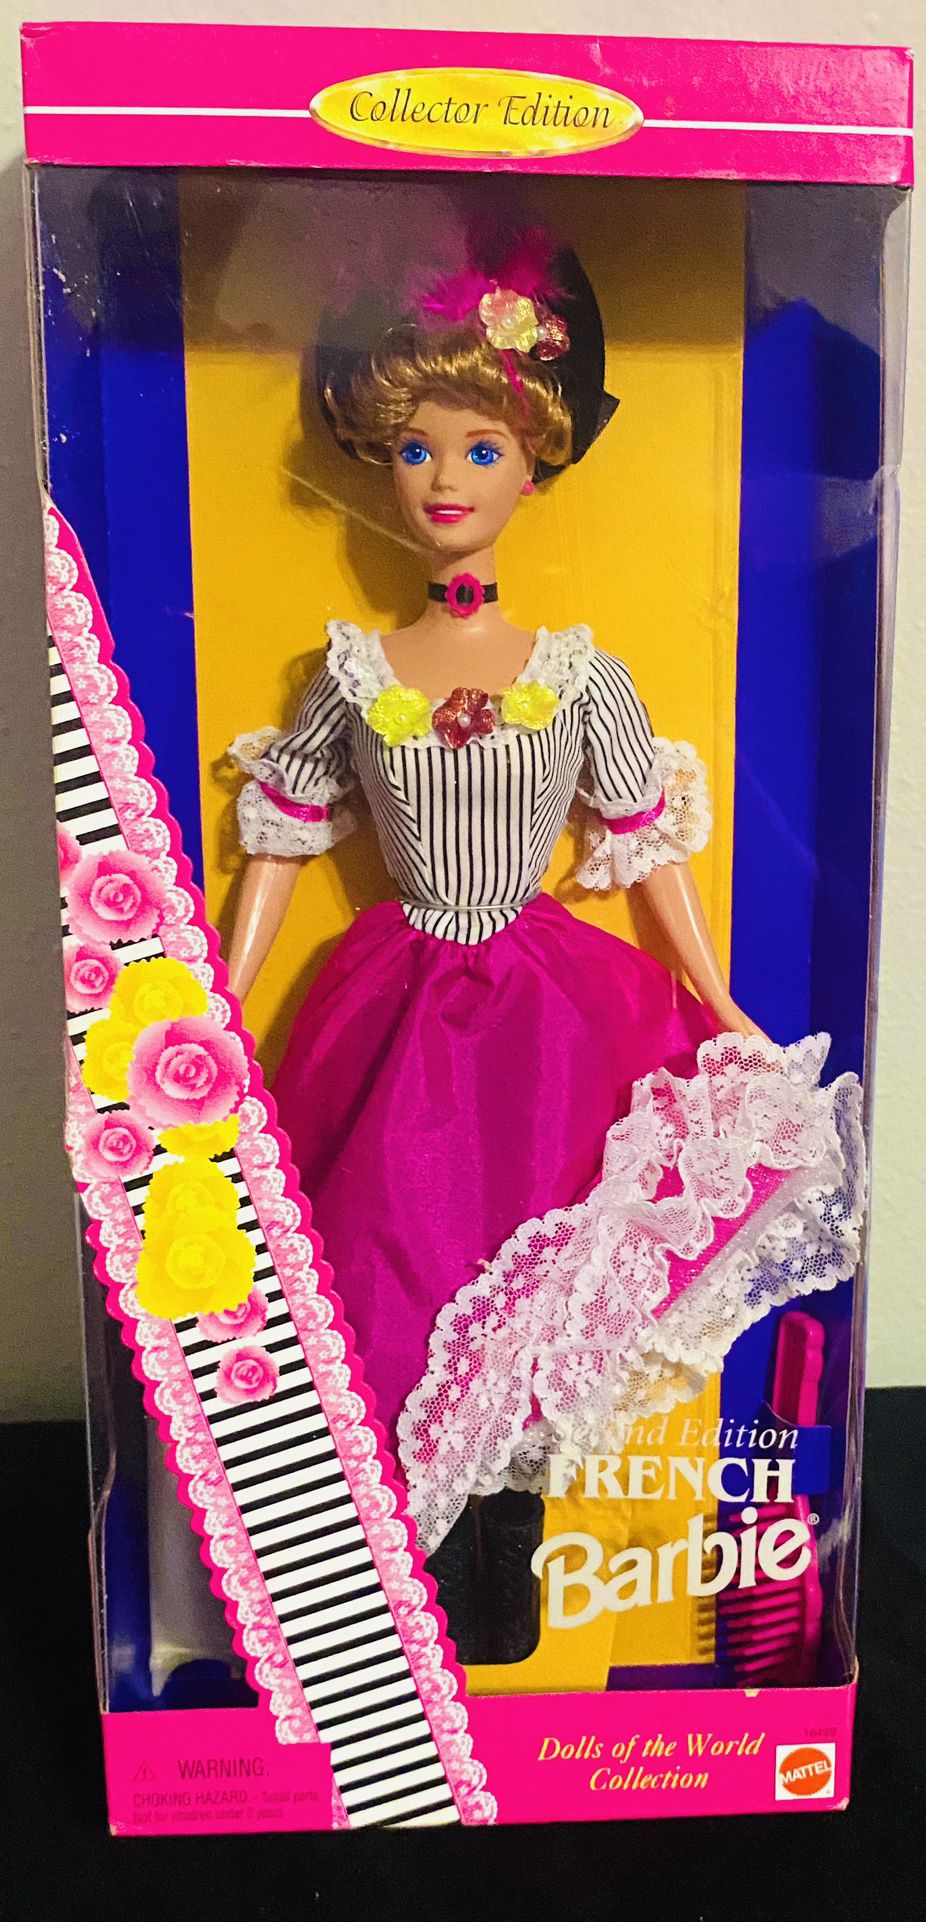 Barbie Dolls of the World French Collector Doll 1996